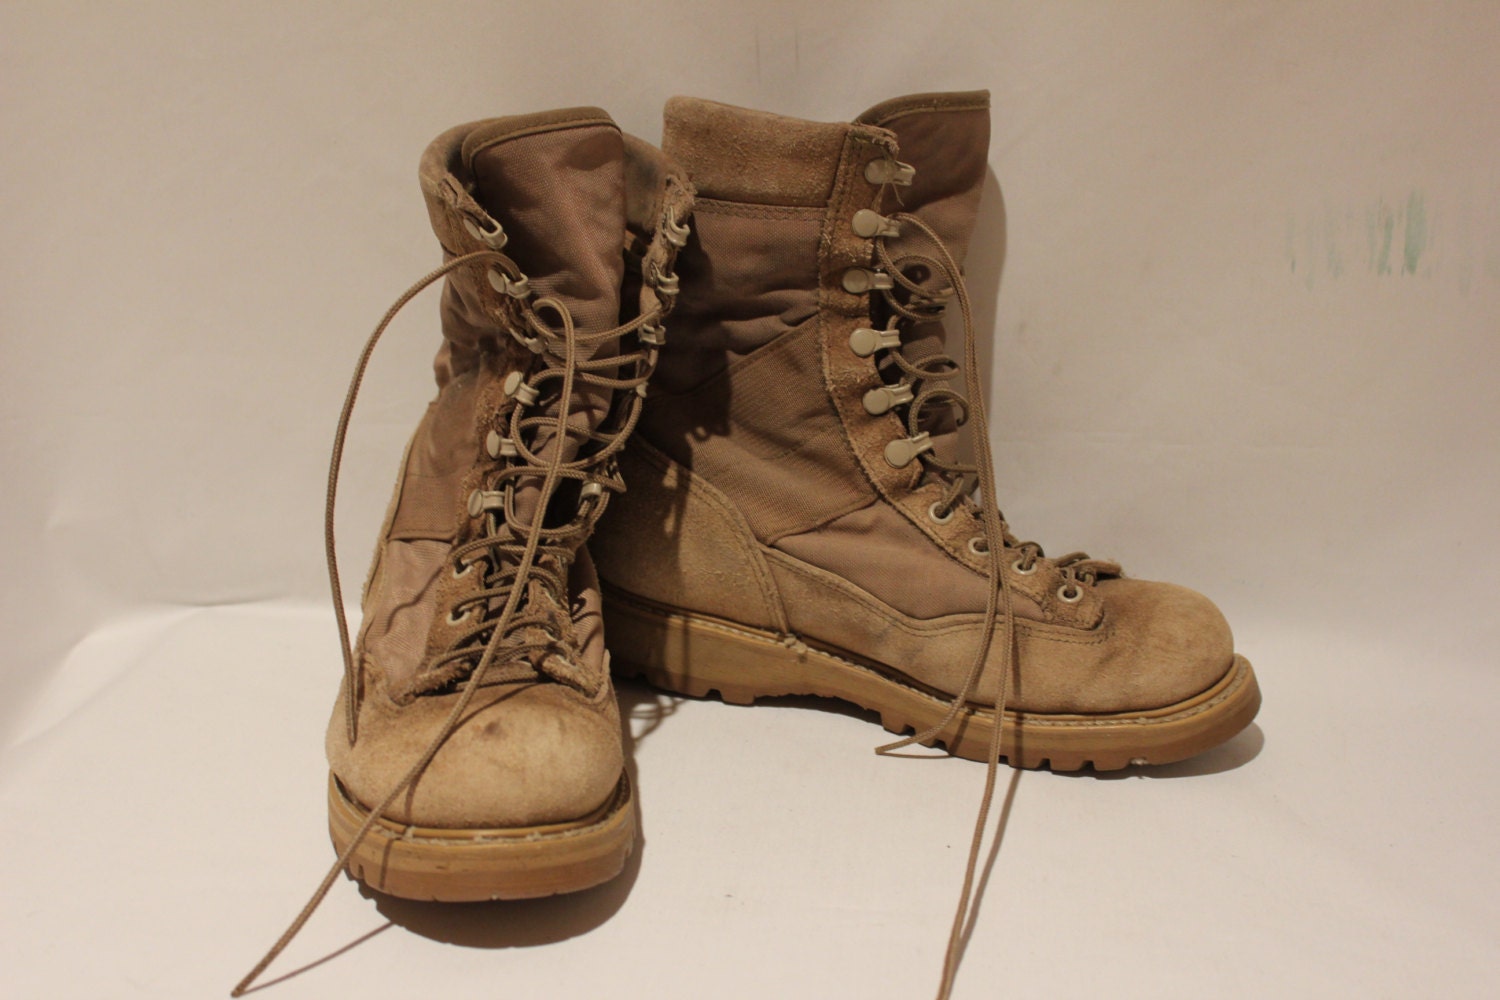 Authentic Military Issue Tan Combat Boots by suppliesofallkinds